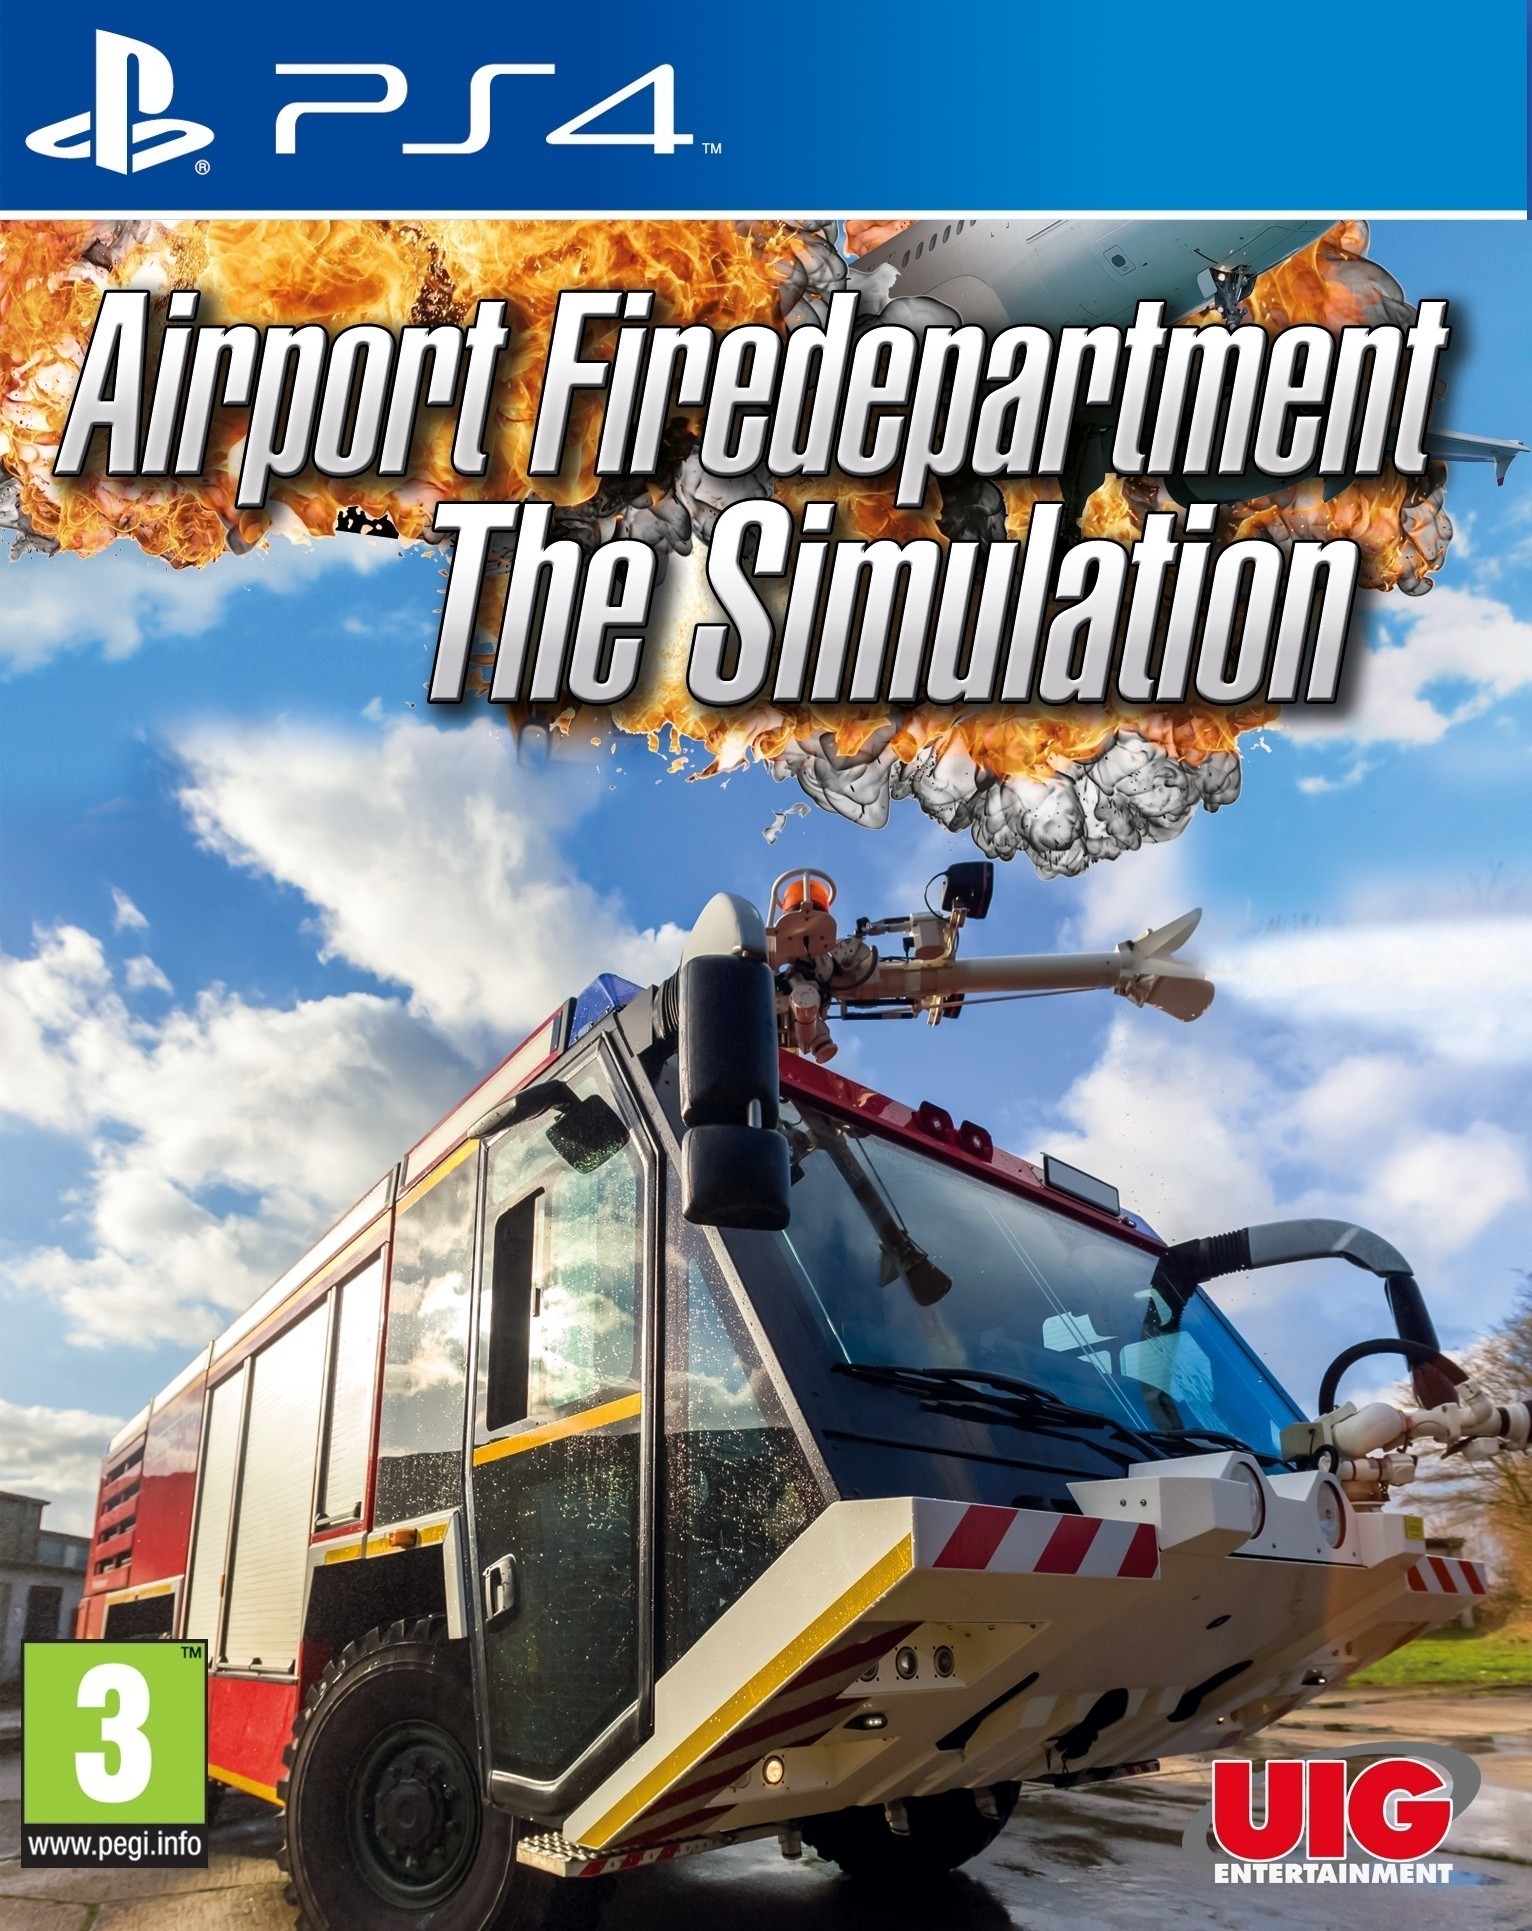 Airport Firedepartment: The Simulation  (PS4), UIG Entertainment